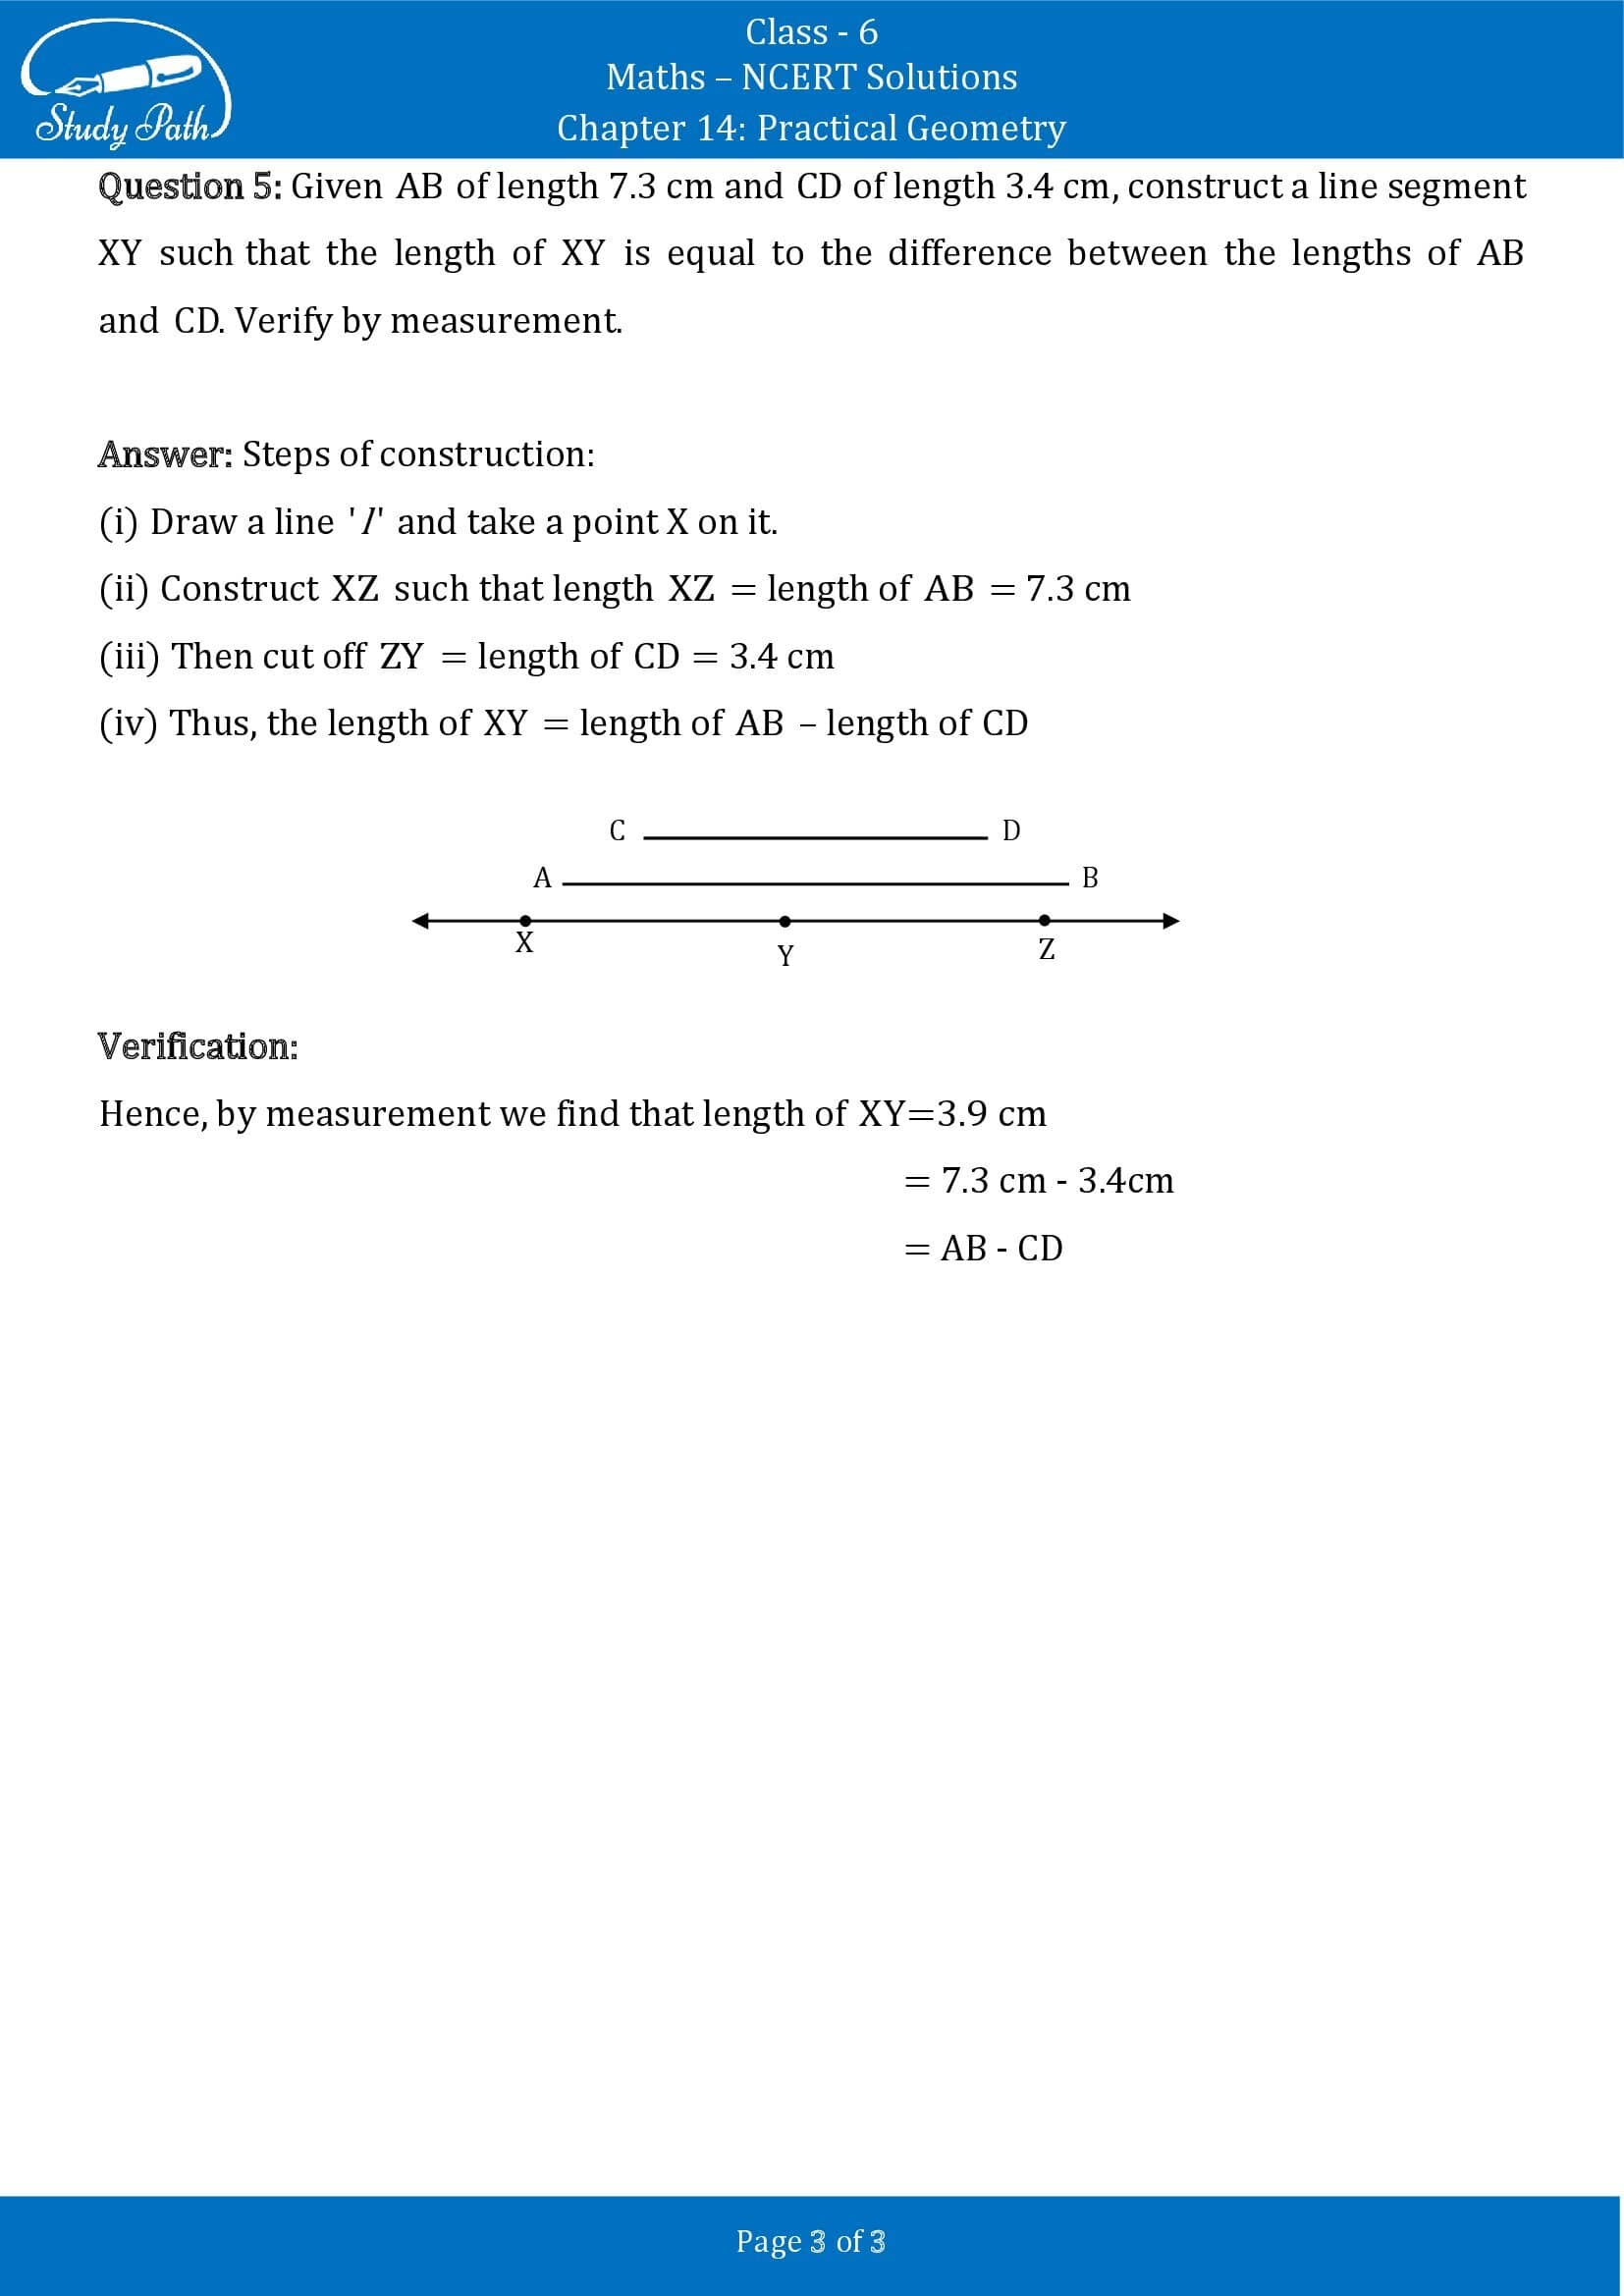 NCERT Solutions for Class 6 Maths Chapter 14 Practical Geometry Exercise 14.2 00003